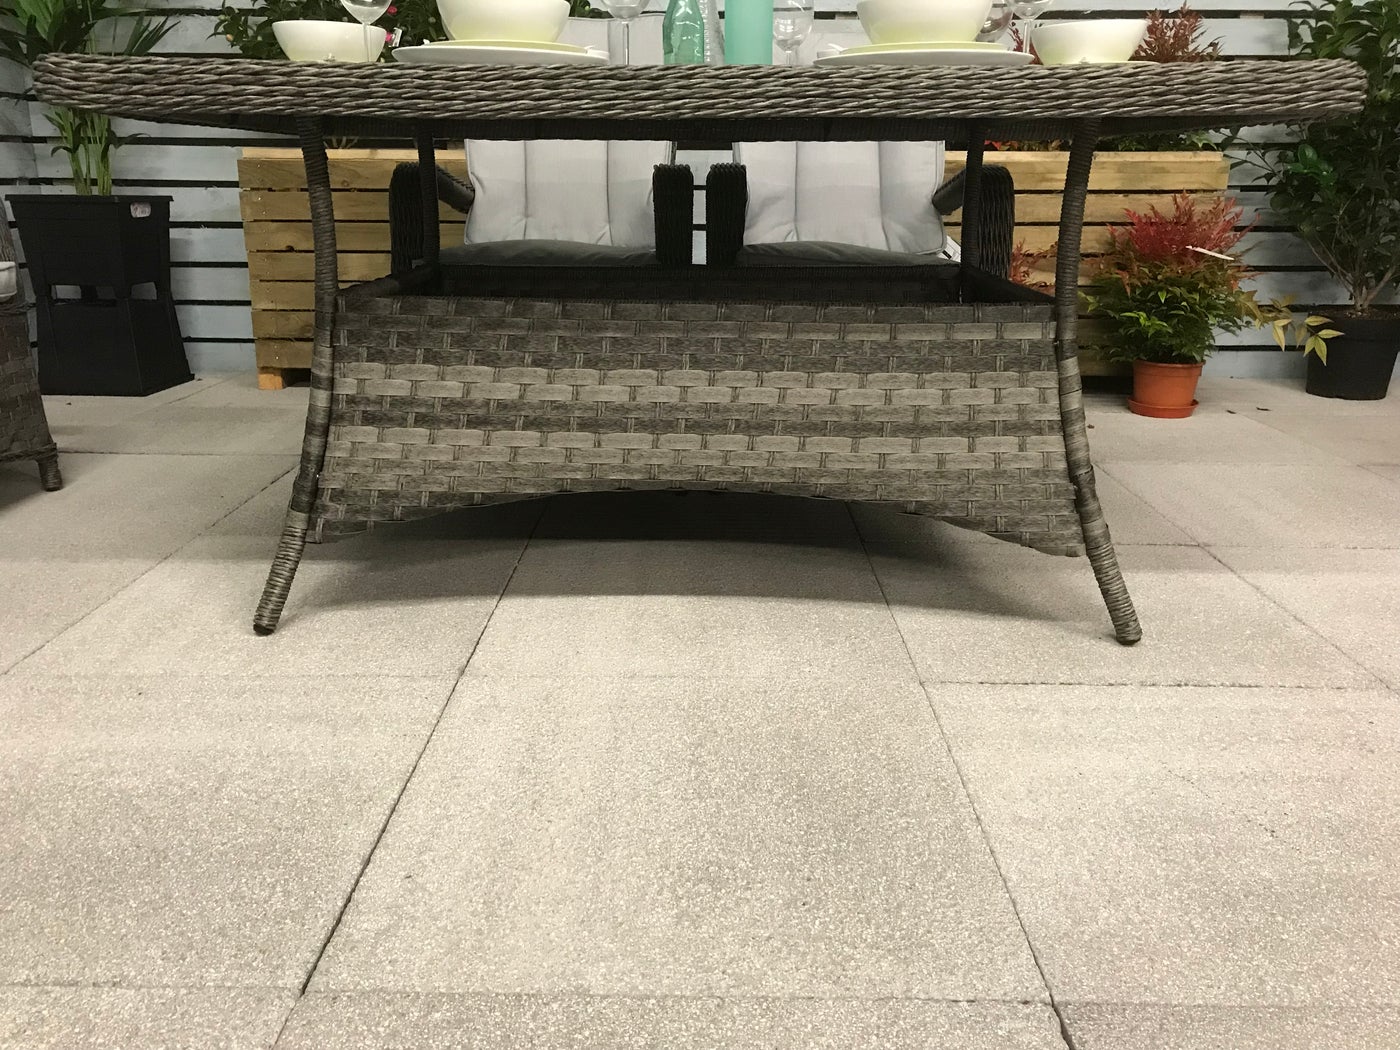 Signature Weave Victoria Rectangular Dining Table In Multi Grey Wicker Base And Legs Close Up-Better Bed Company